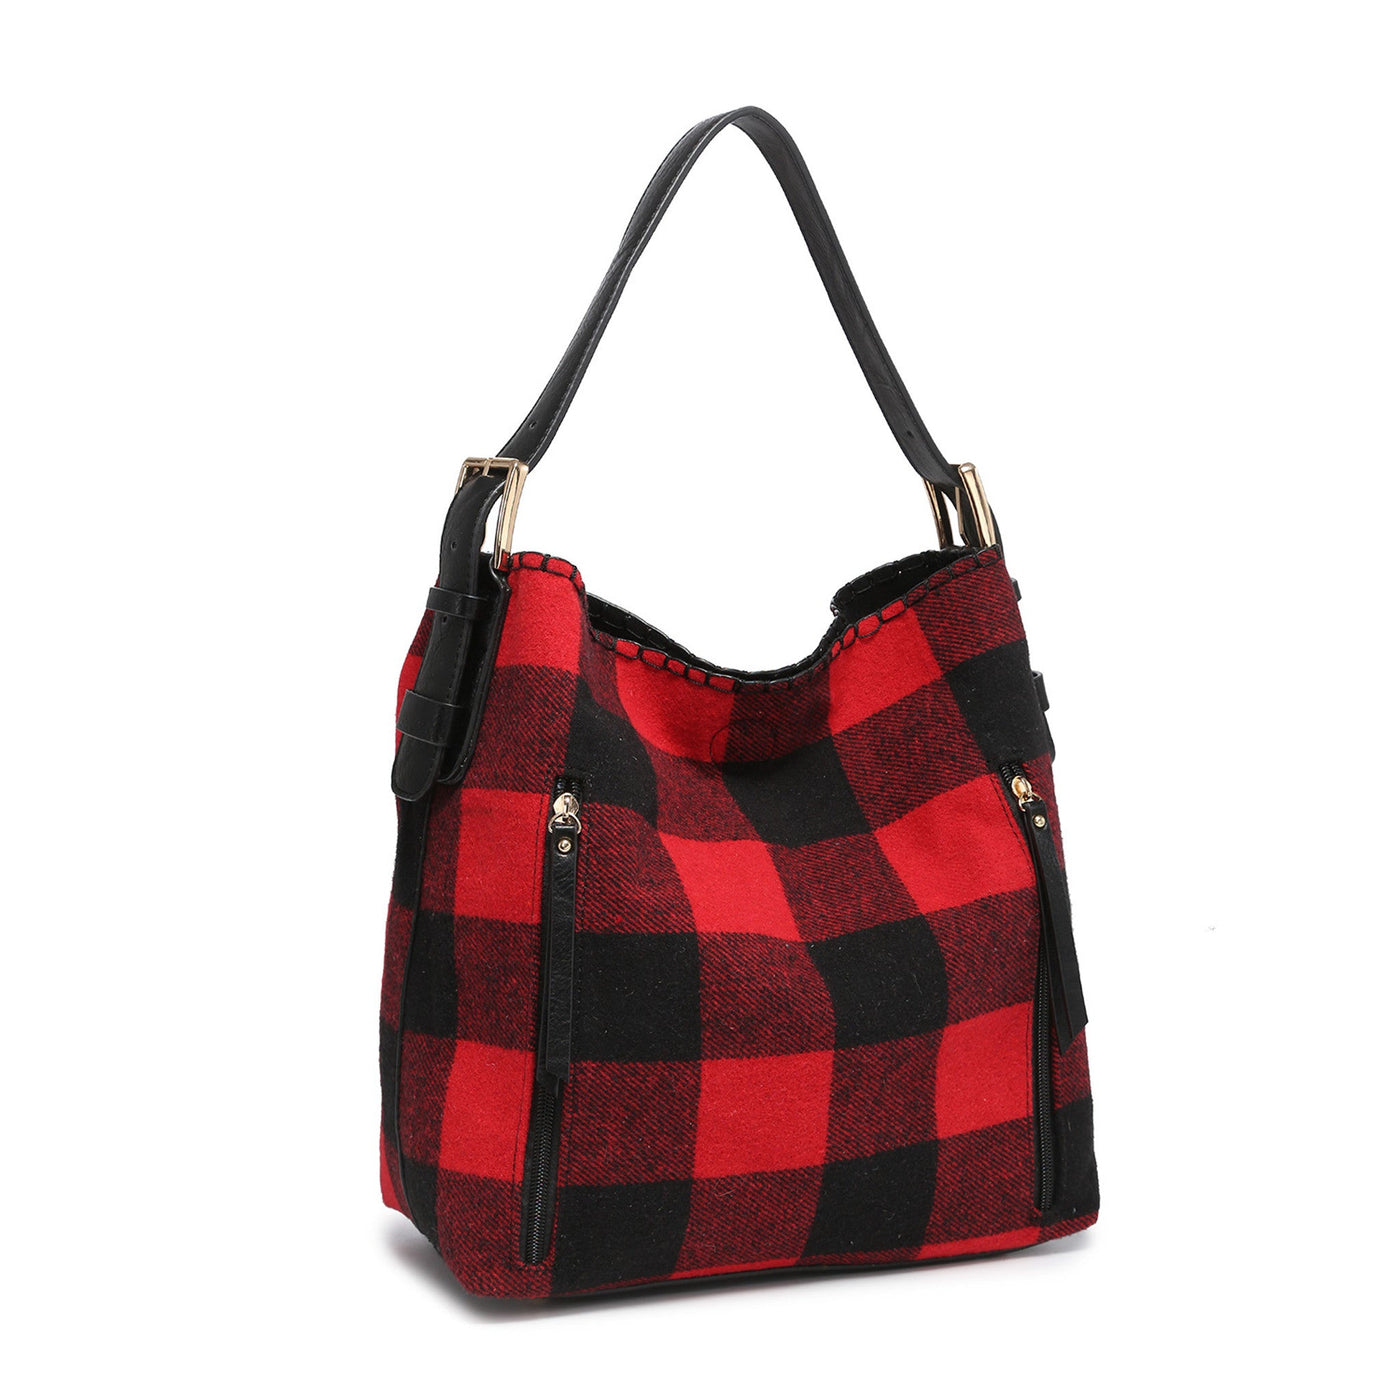 M1816APLD Alexa Plaid 2-in-1 Hobo Bag w/Dual Accessory Compartments